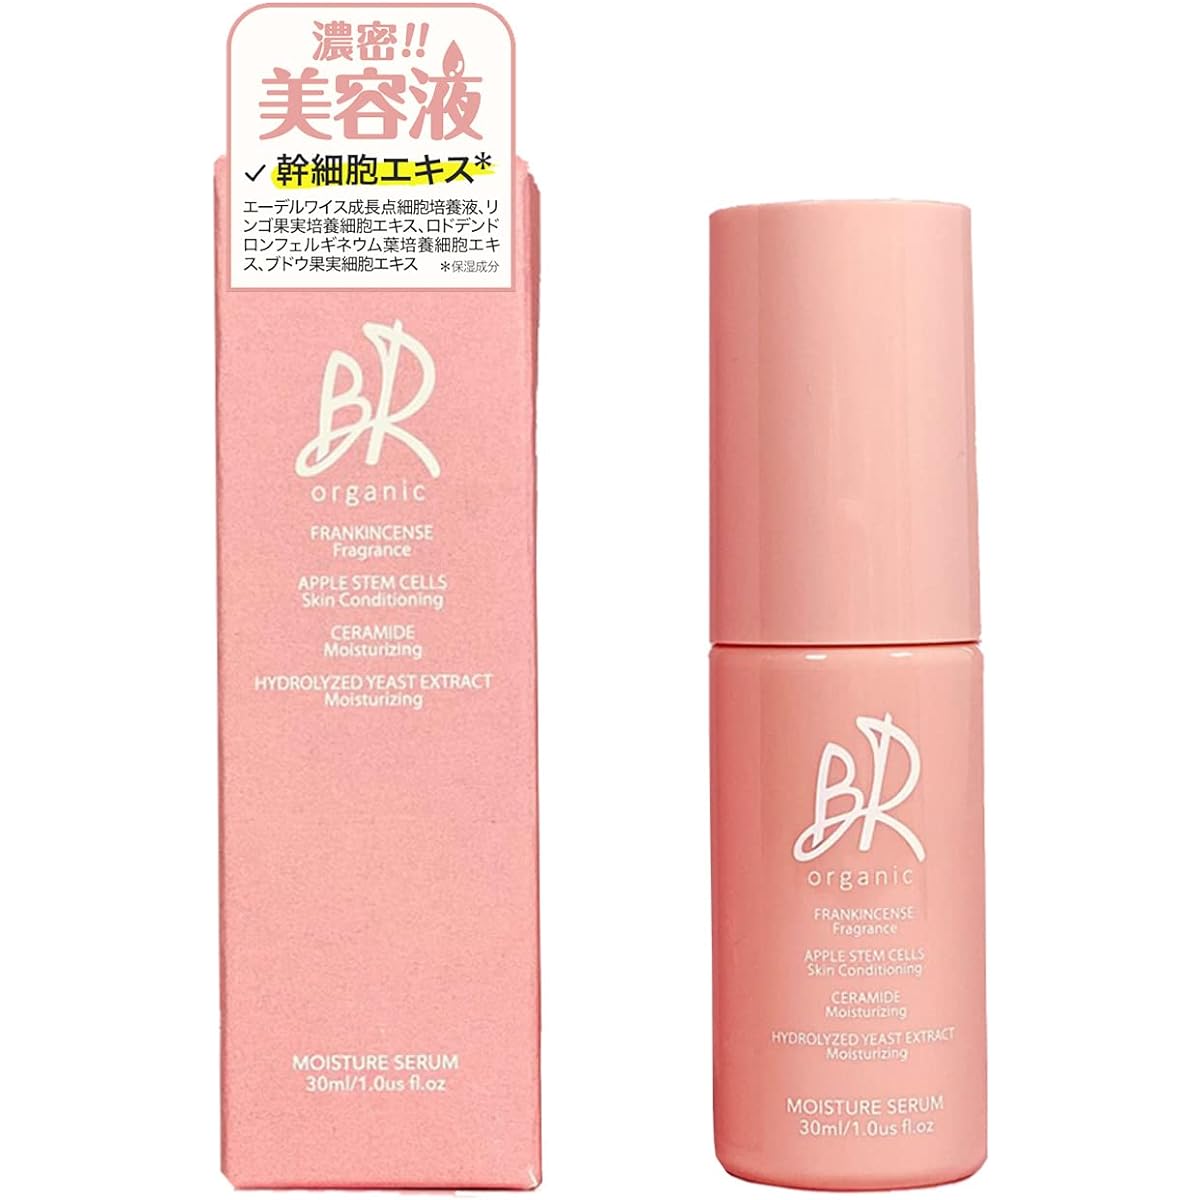 BR organic Serum Organic 30ml Vitamin C Stem Cell Ceramide Hyaluronic Acid Frankincense Contains 55 naturally derived ingredients Aging Care Moisturizing Sensitive Skin Dry Skin Face Made in Japan